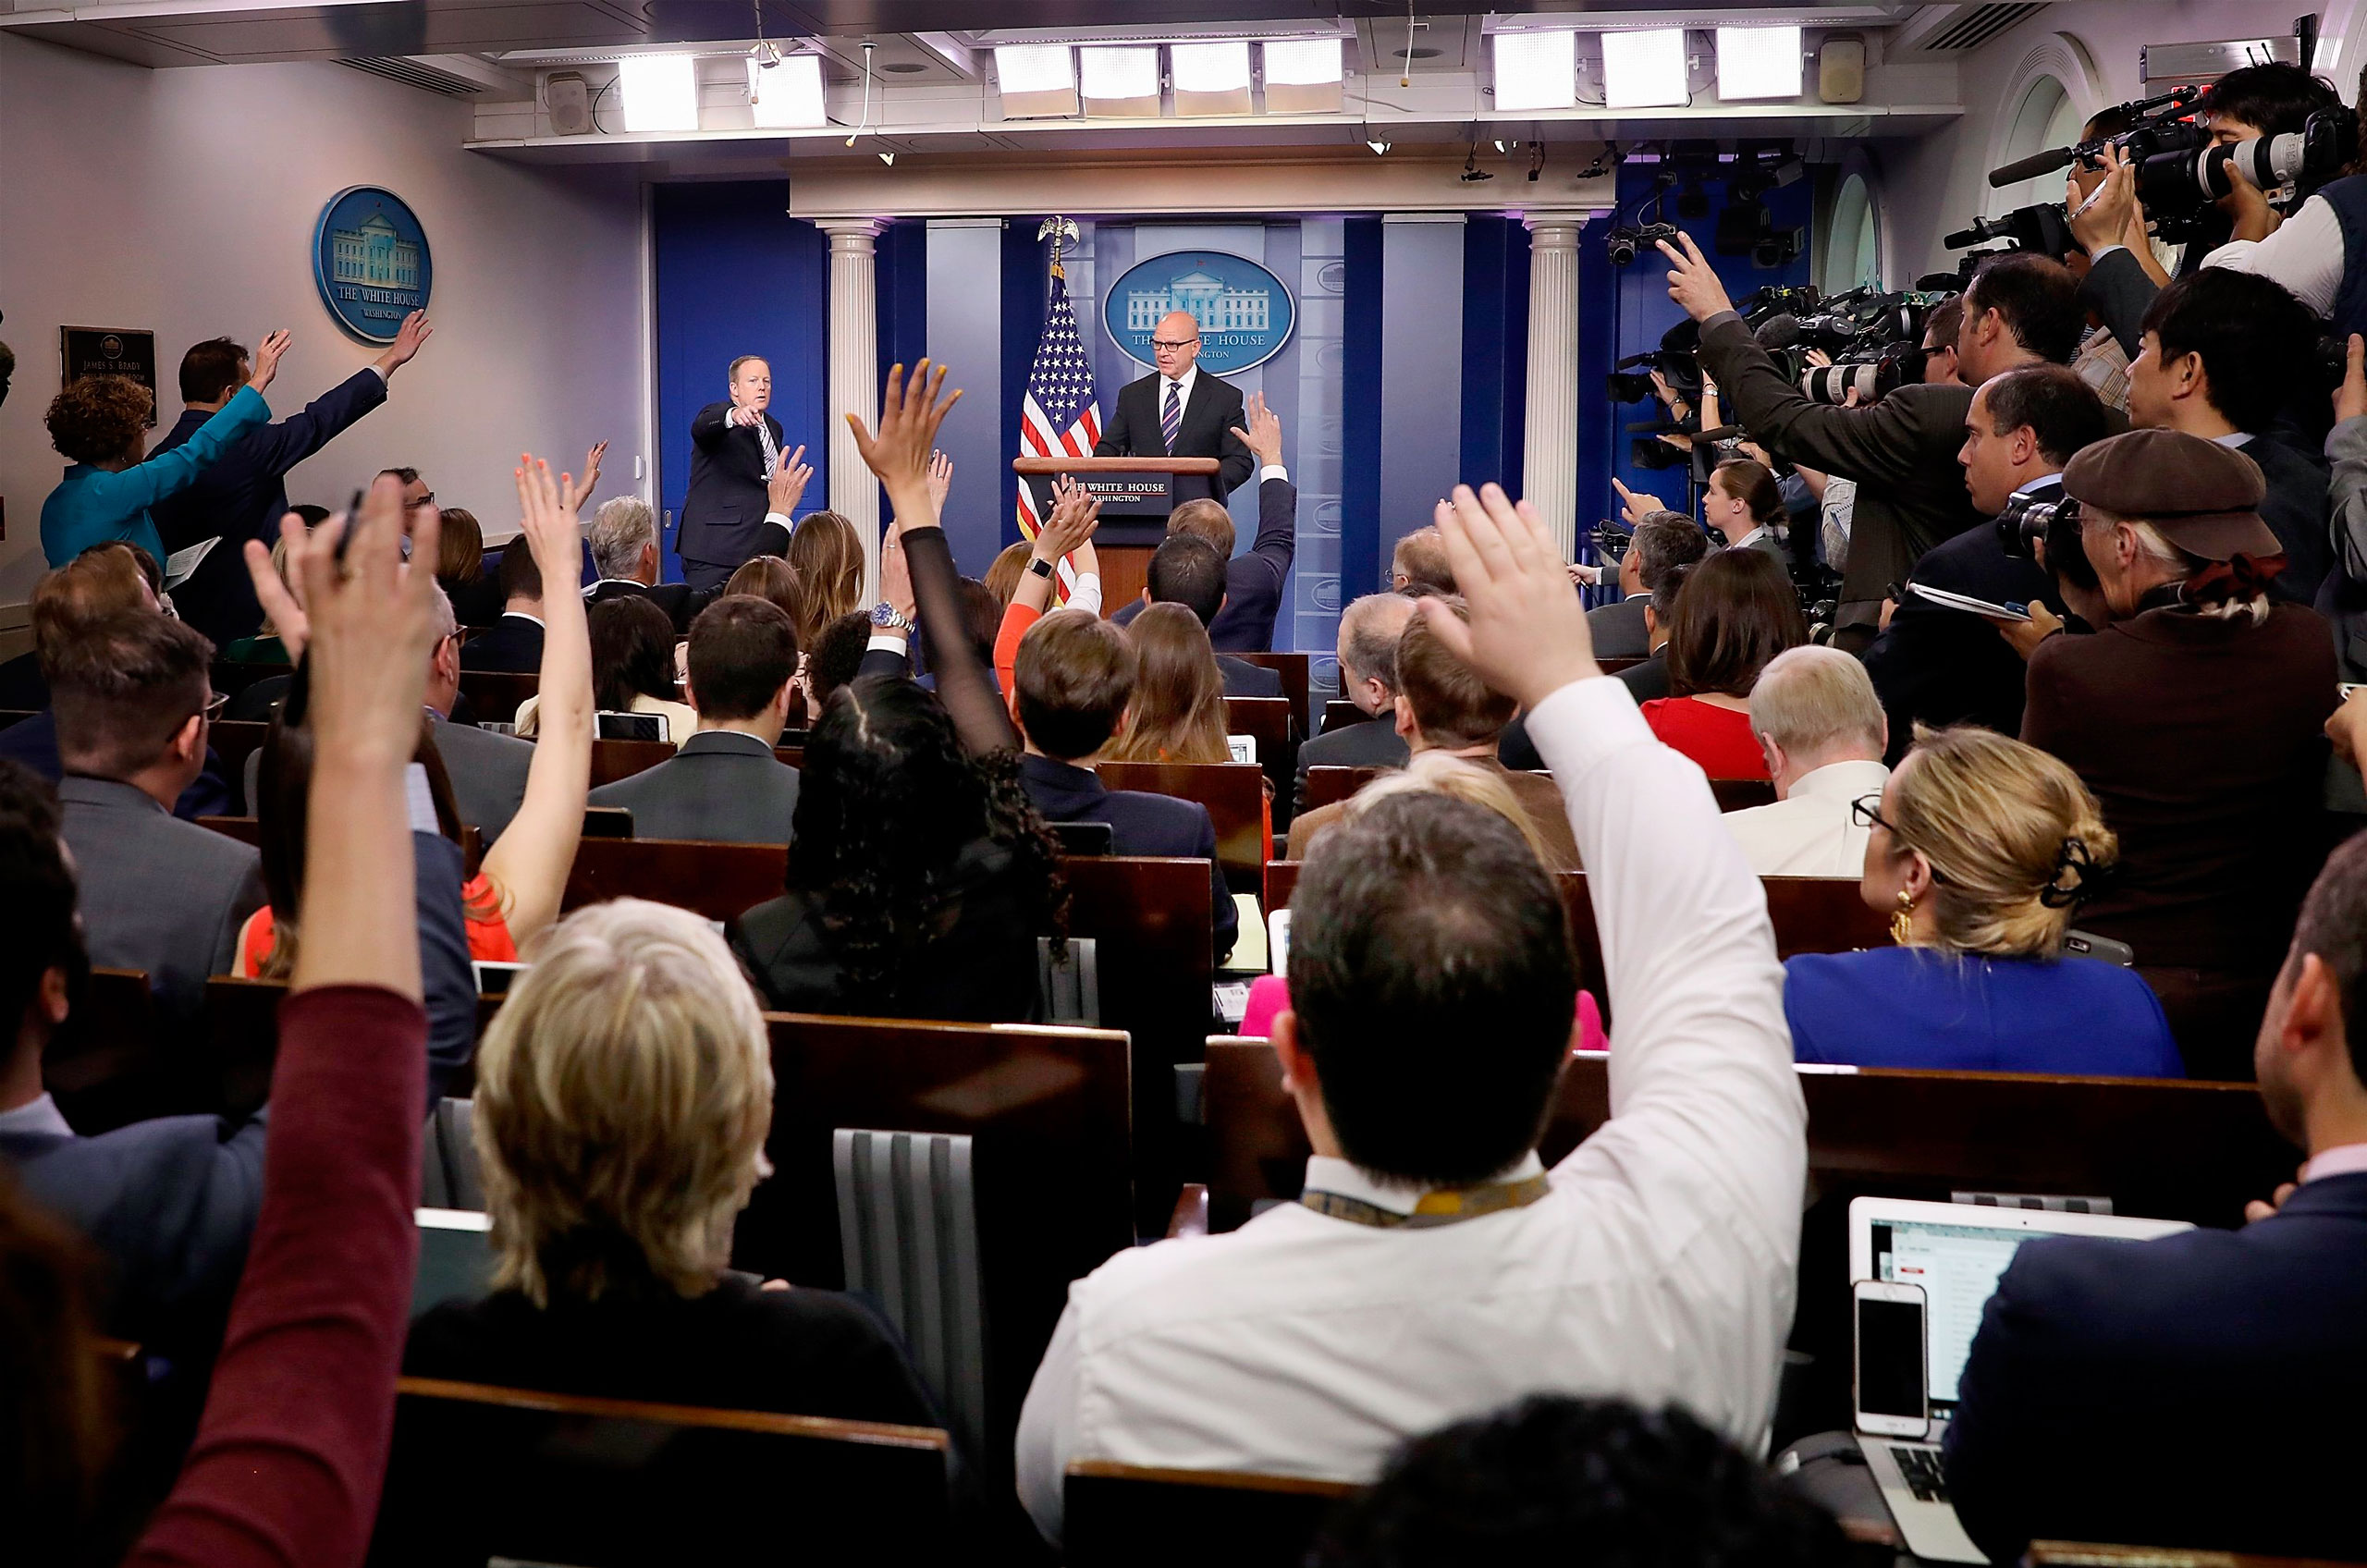 McMaster at the briefing-room podium, defending Trump’s decision to share intelligence with Russia (Win McNamee—Getty Images)